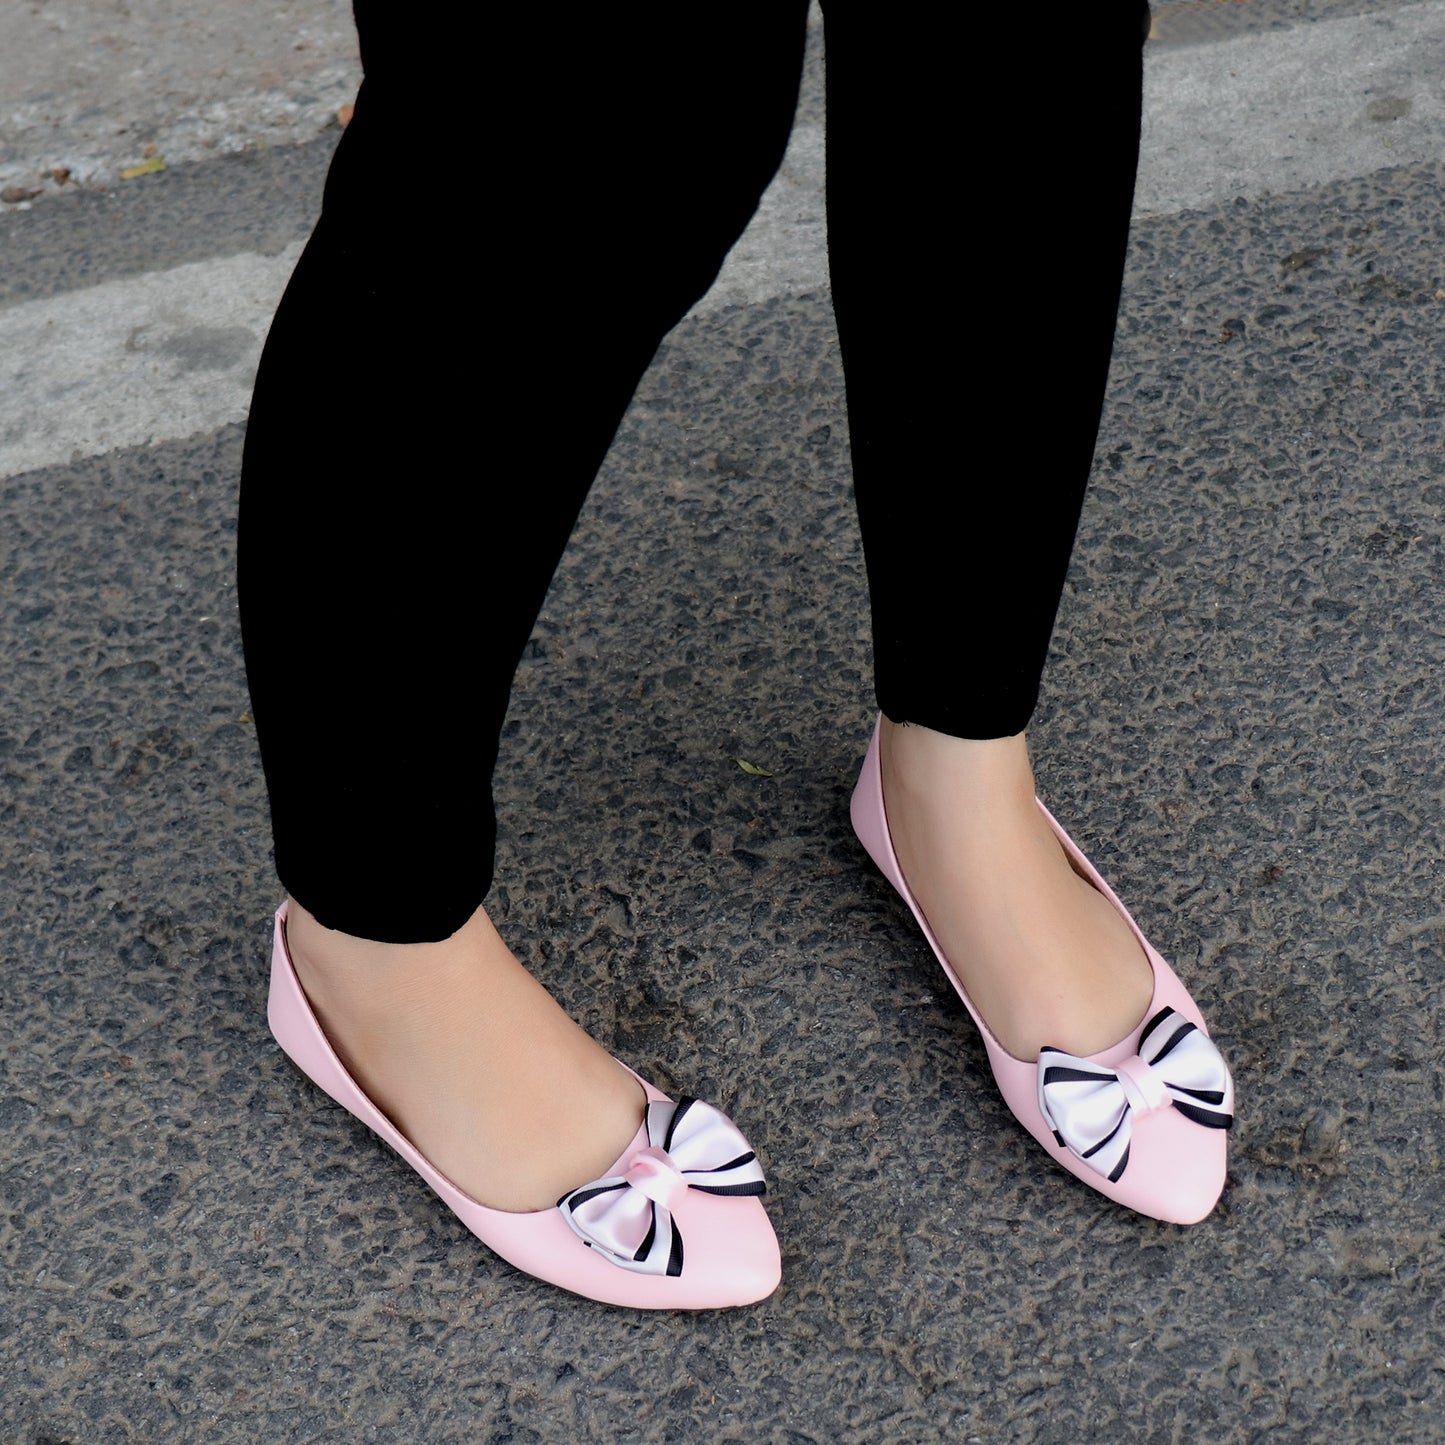 Foot Wear,Satin Bow Bellies in Pink - Cippele Multi Store